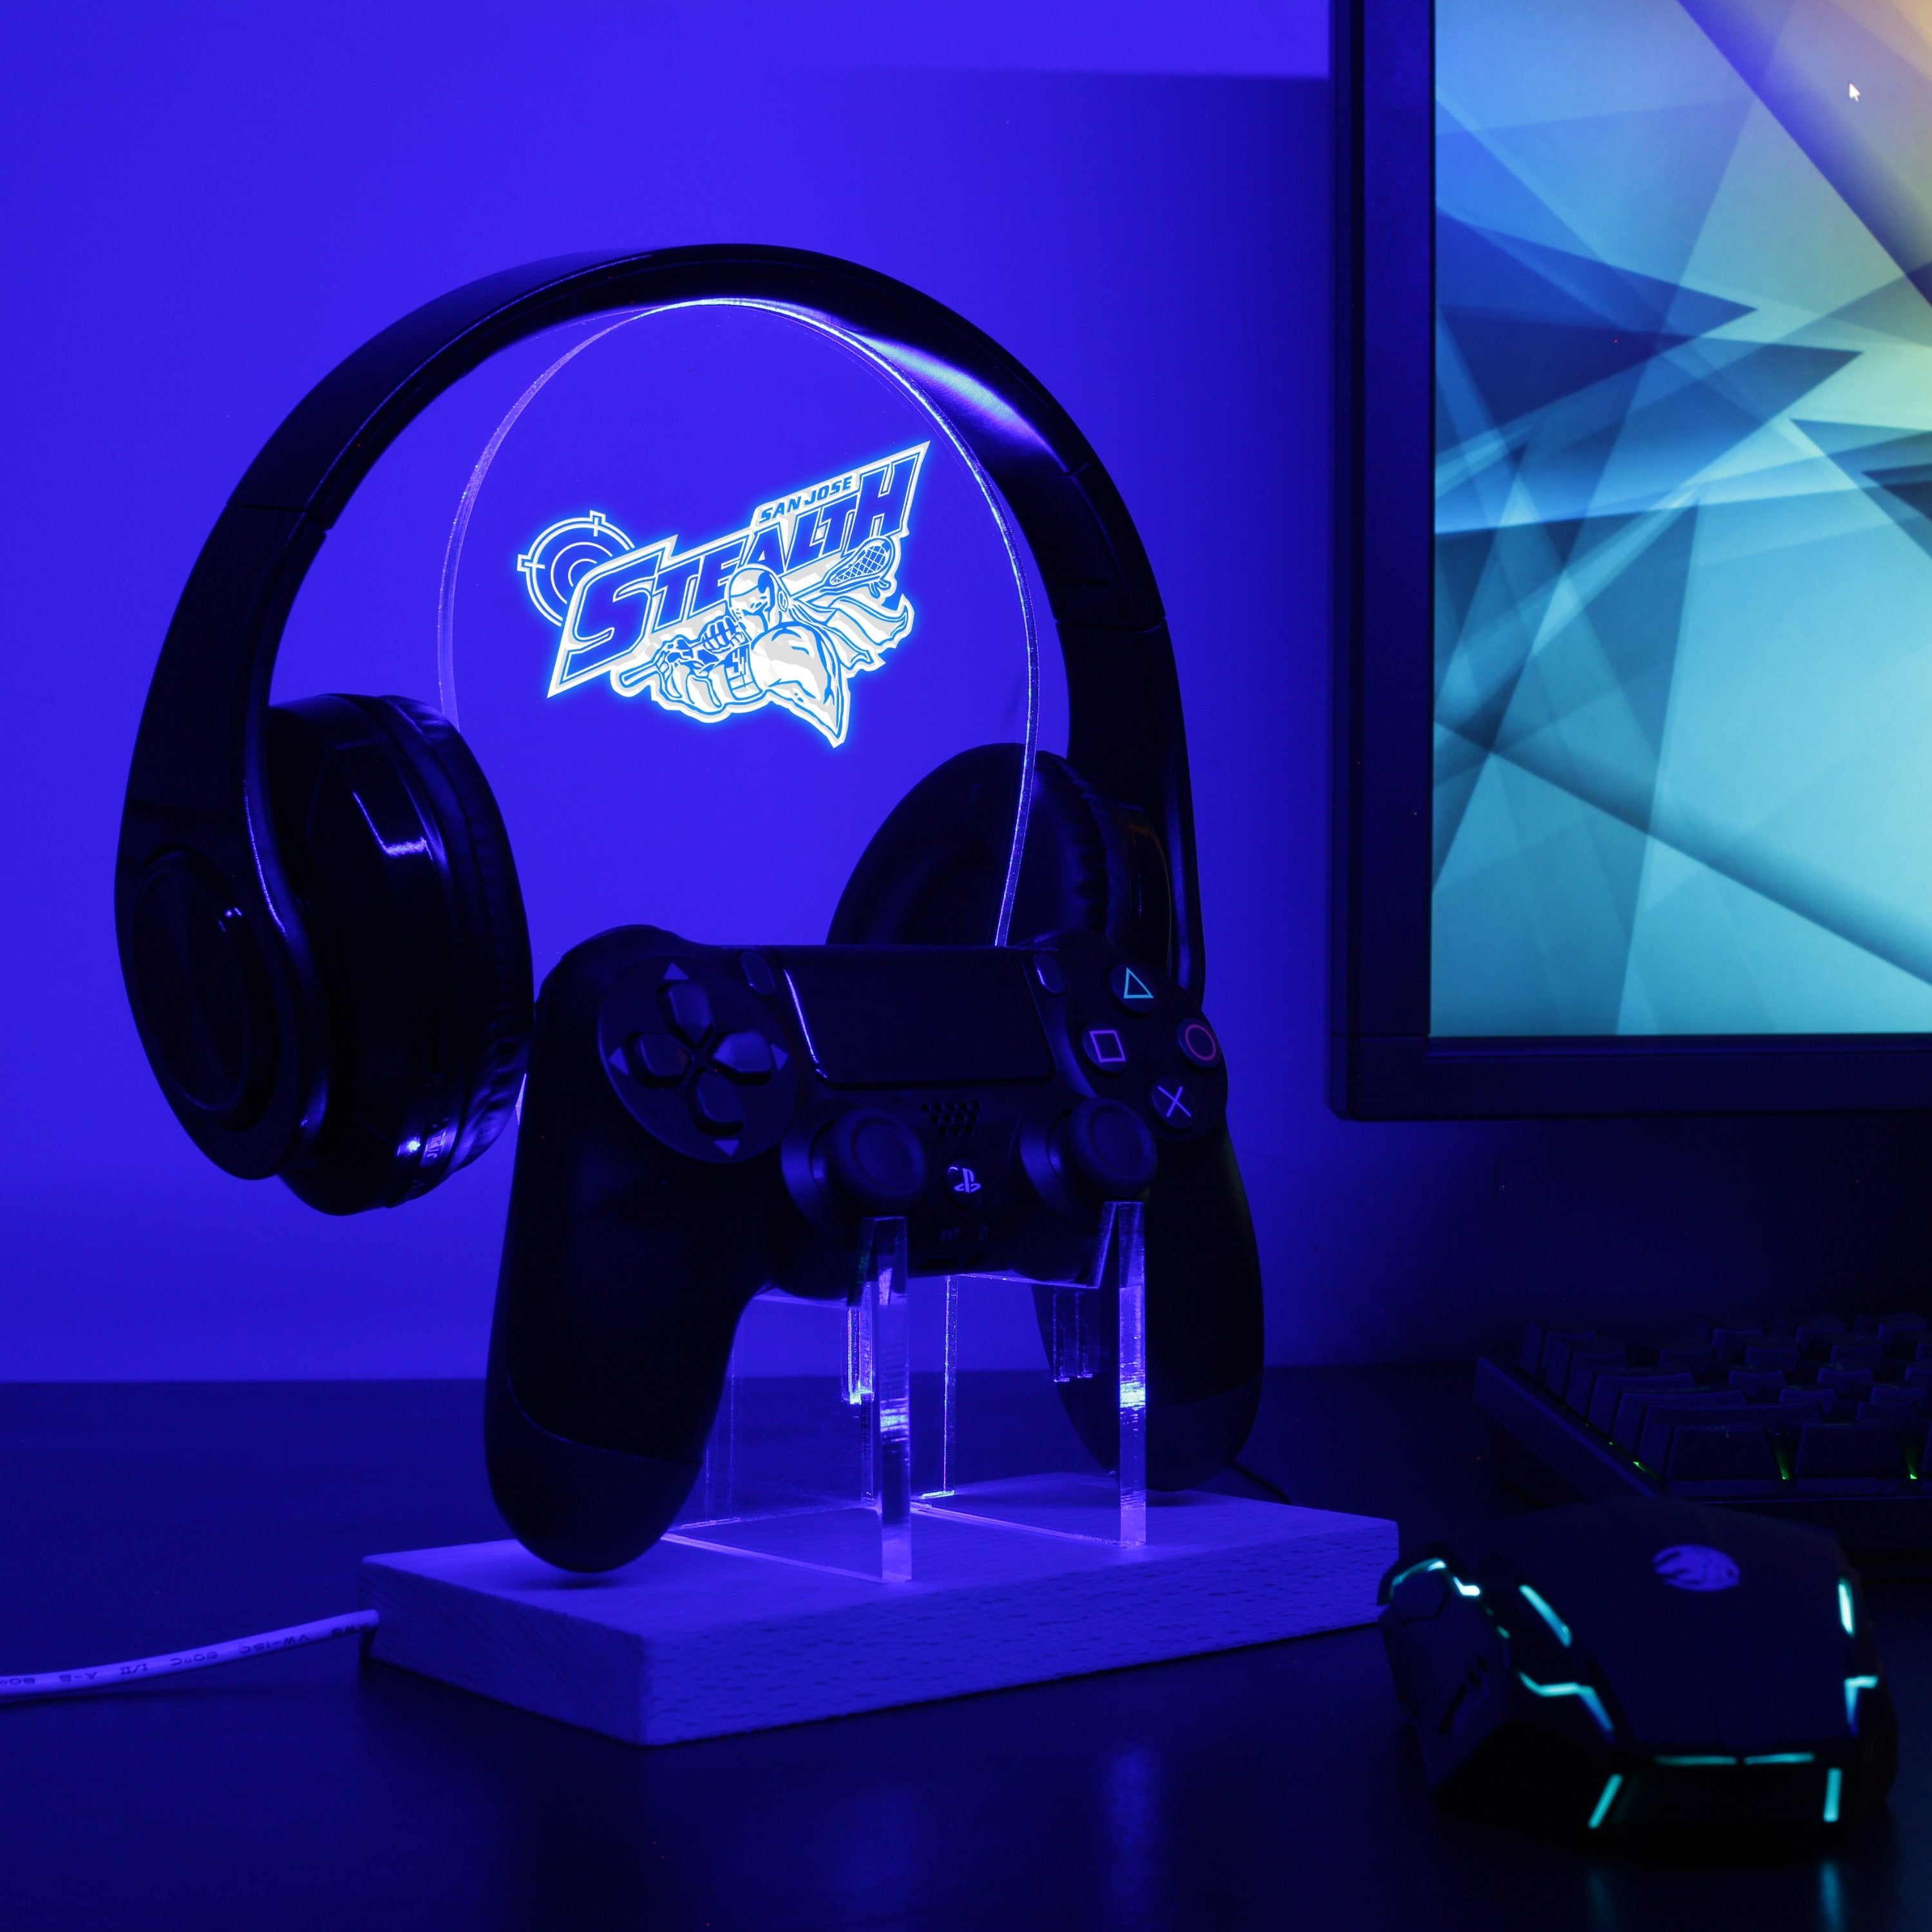 San Jose Stealth LED Gaming Headset Controller Stand